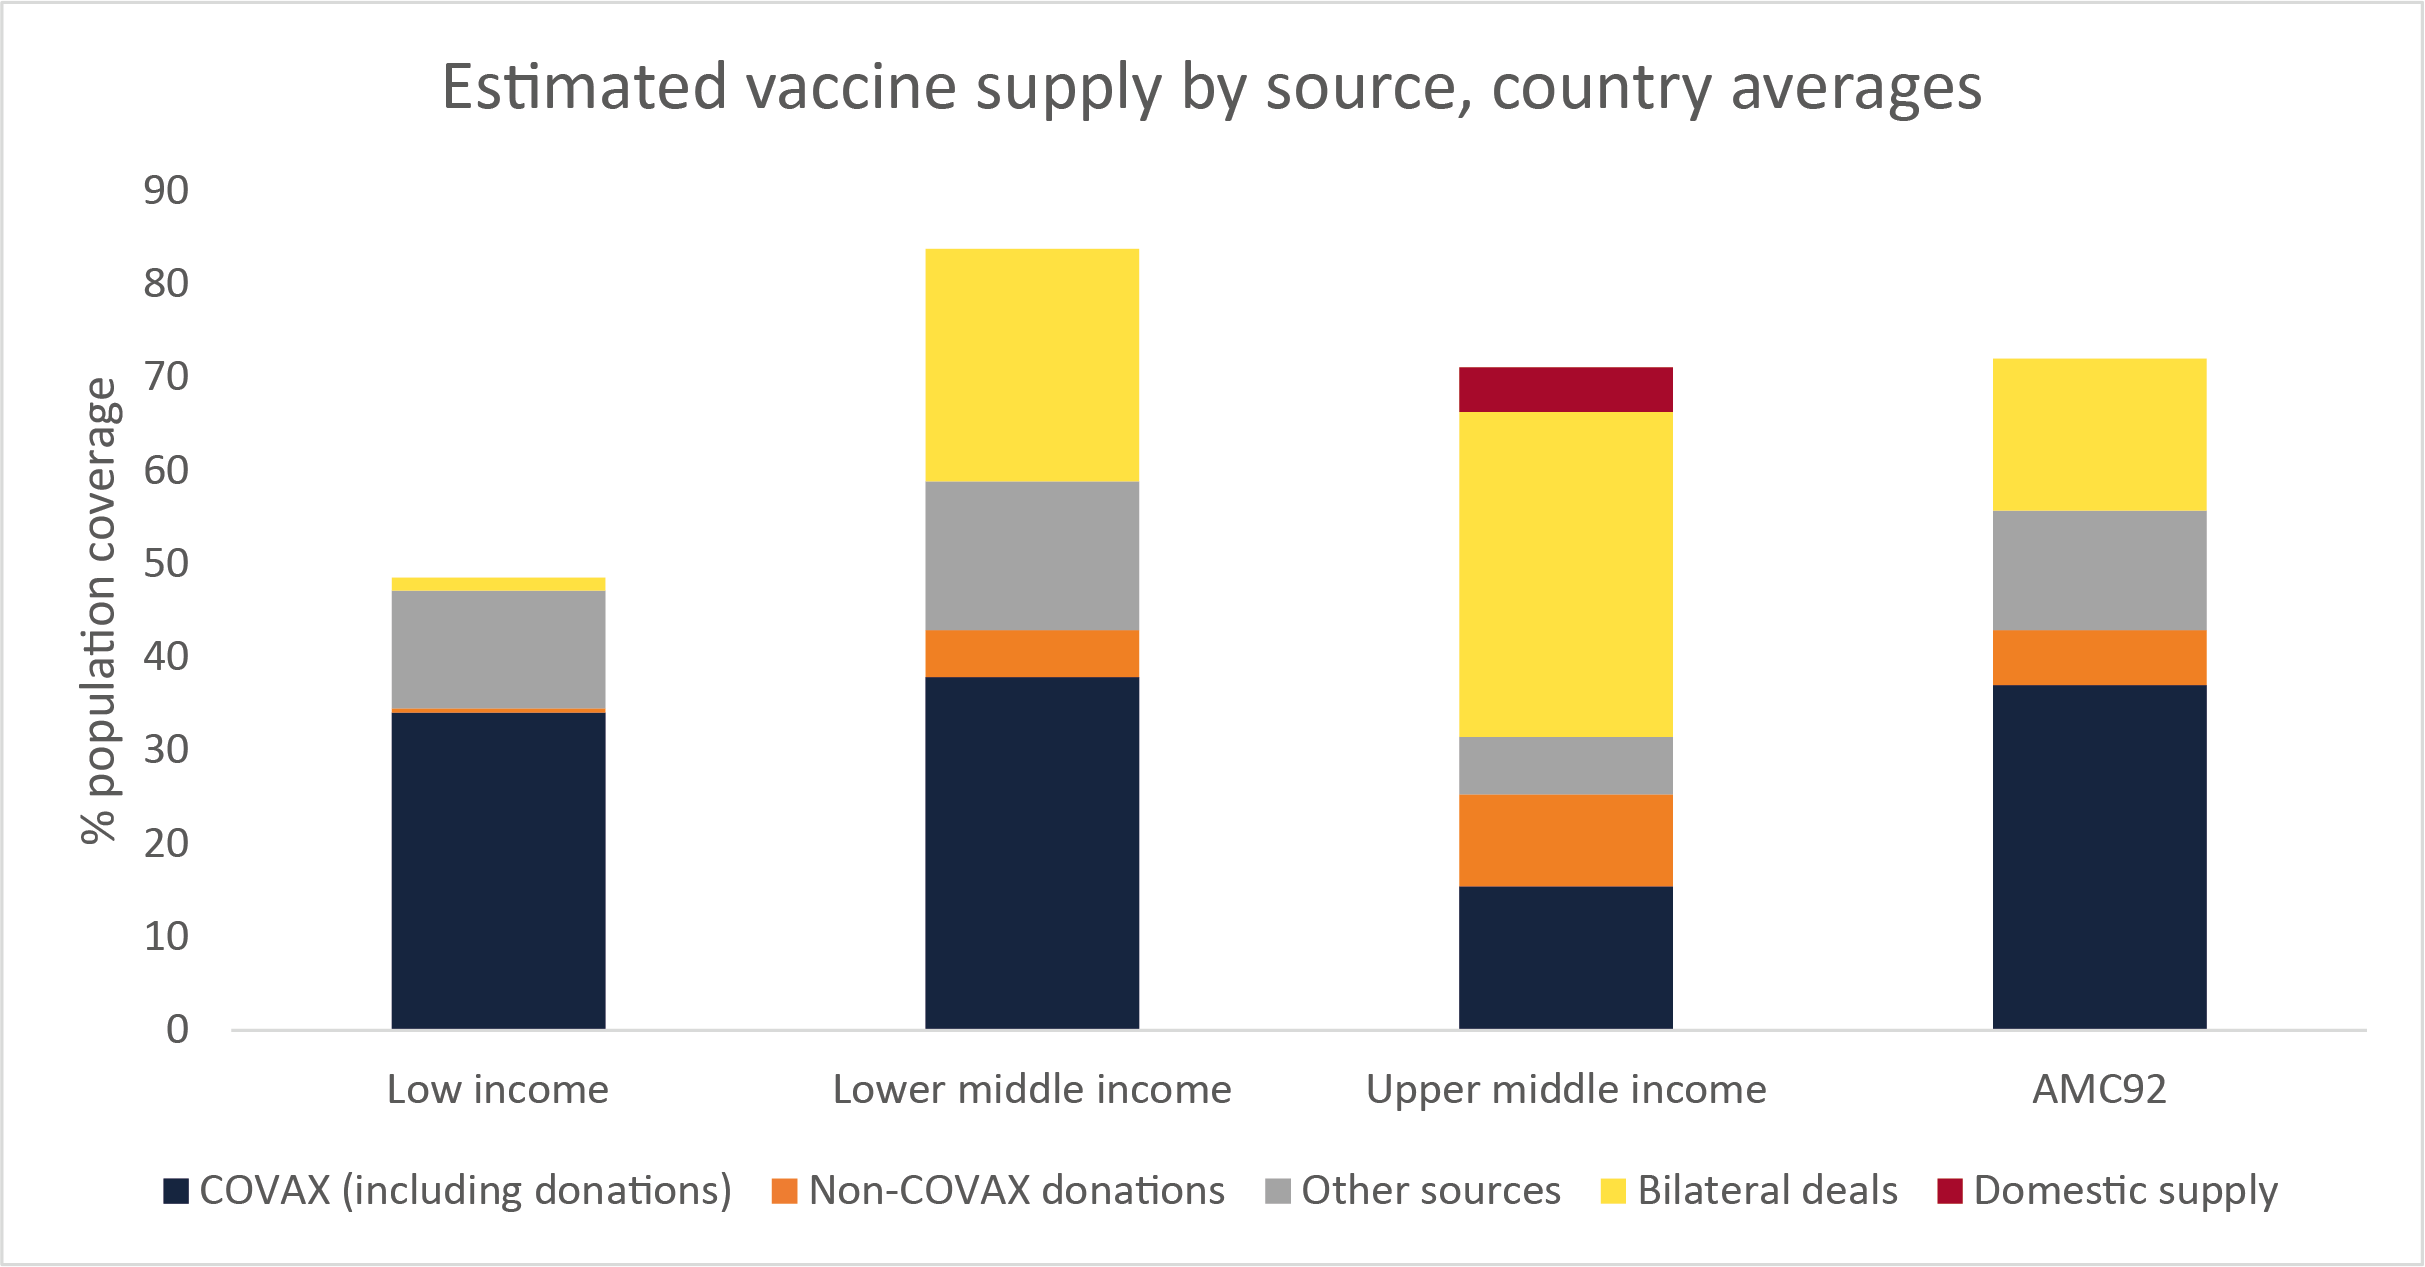 Estimated vaccine supply by source, country averages